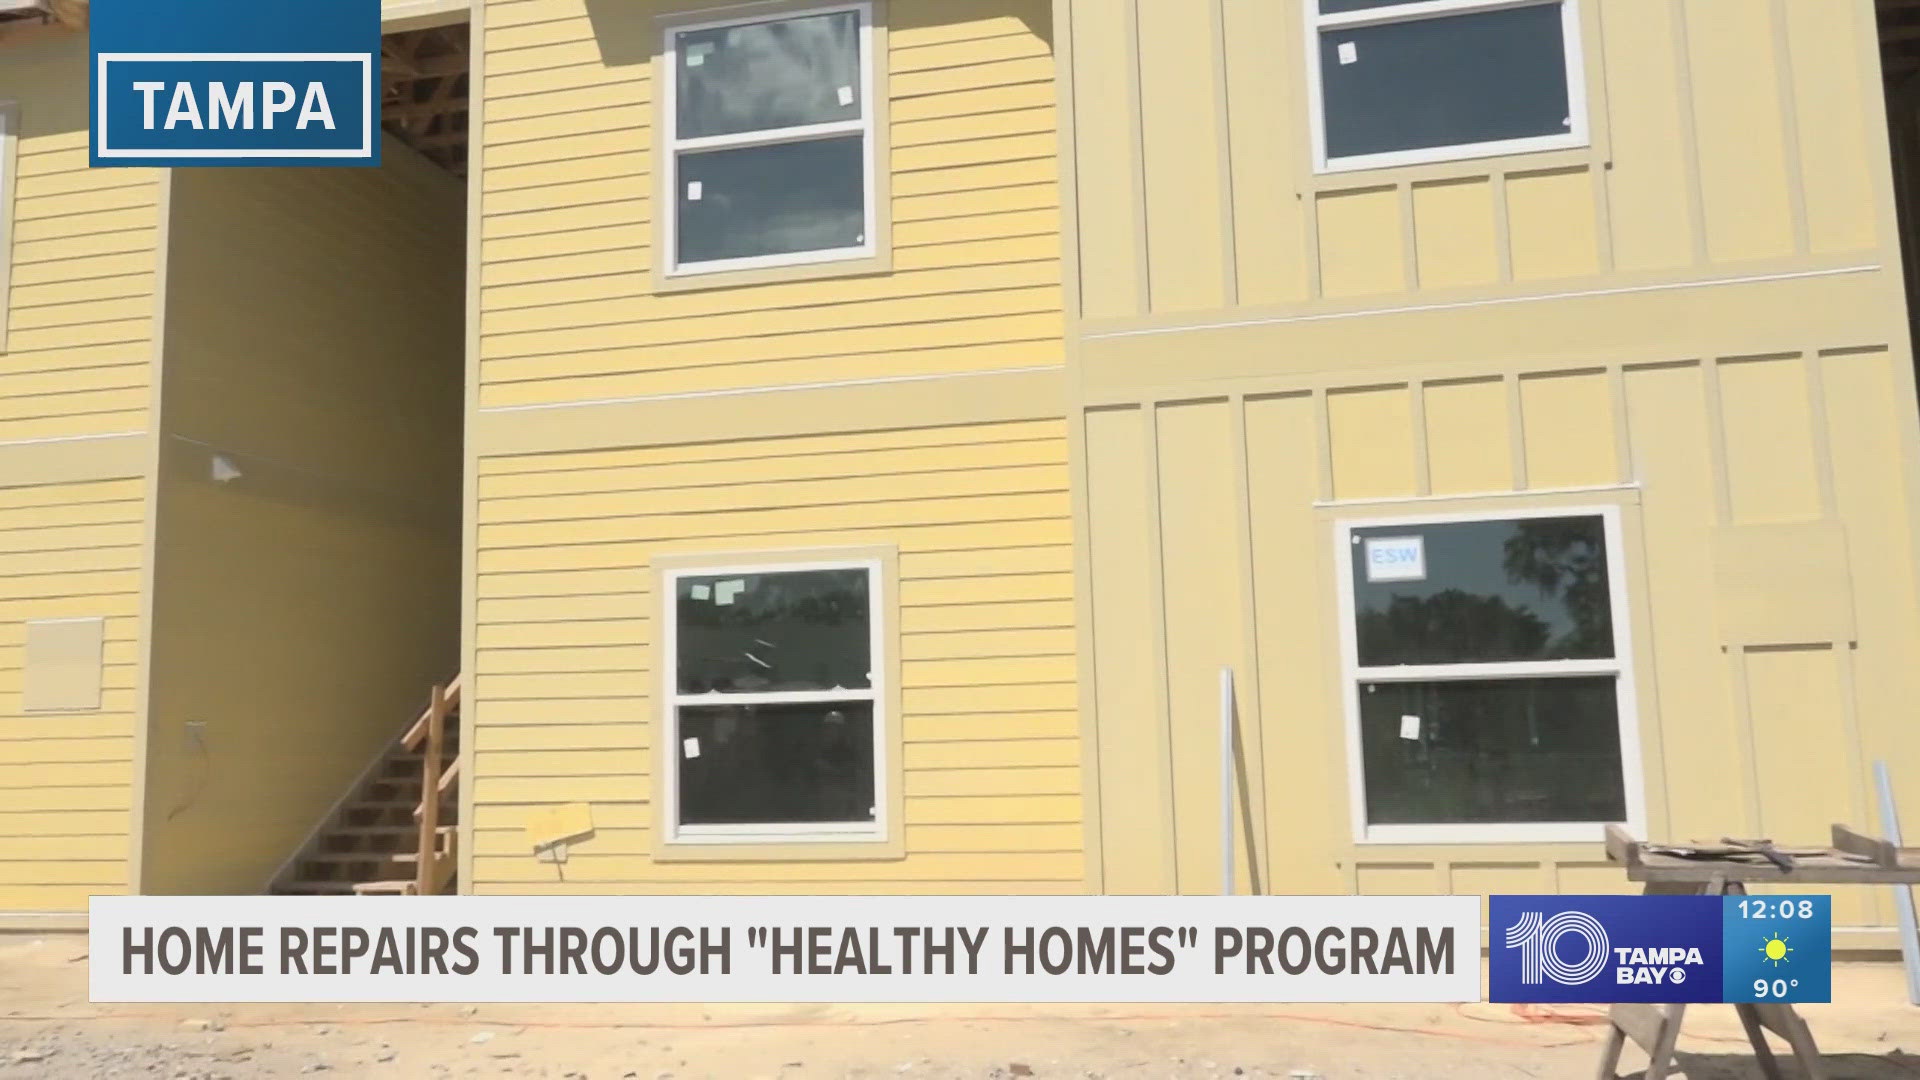 One woman told 10 Tampa Bay the program is helping her get a new roof and complete much-needed repairs to water damage in her house.